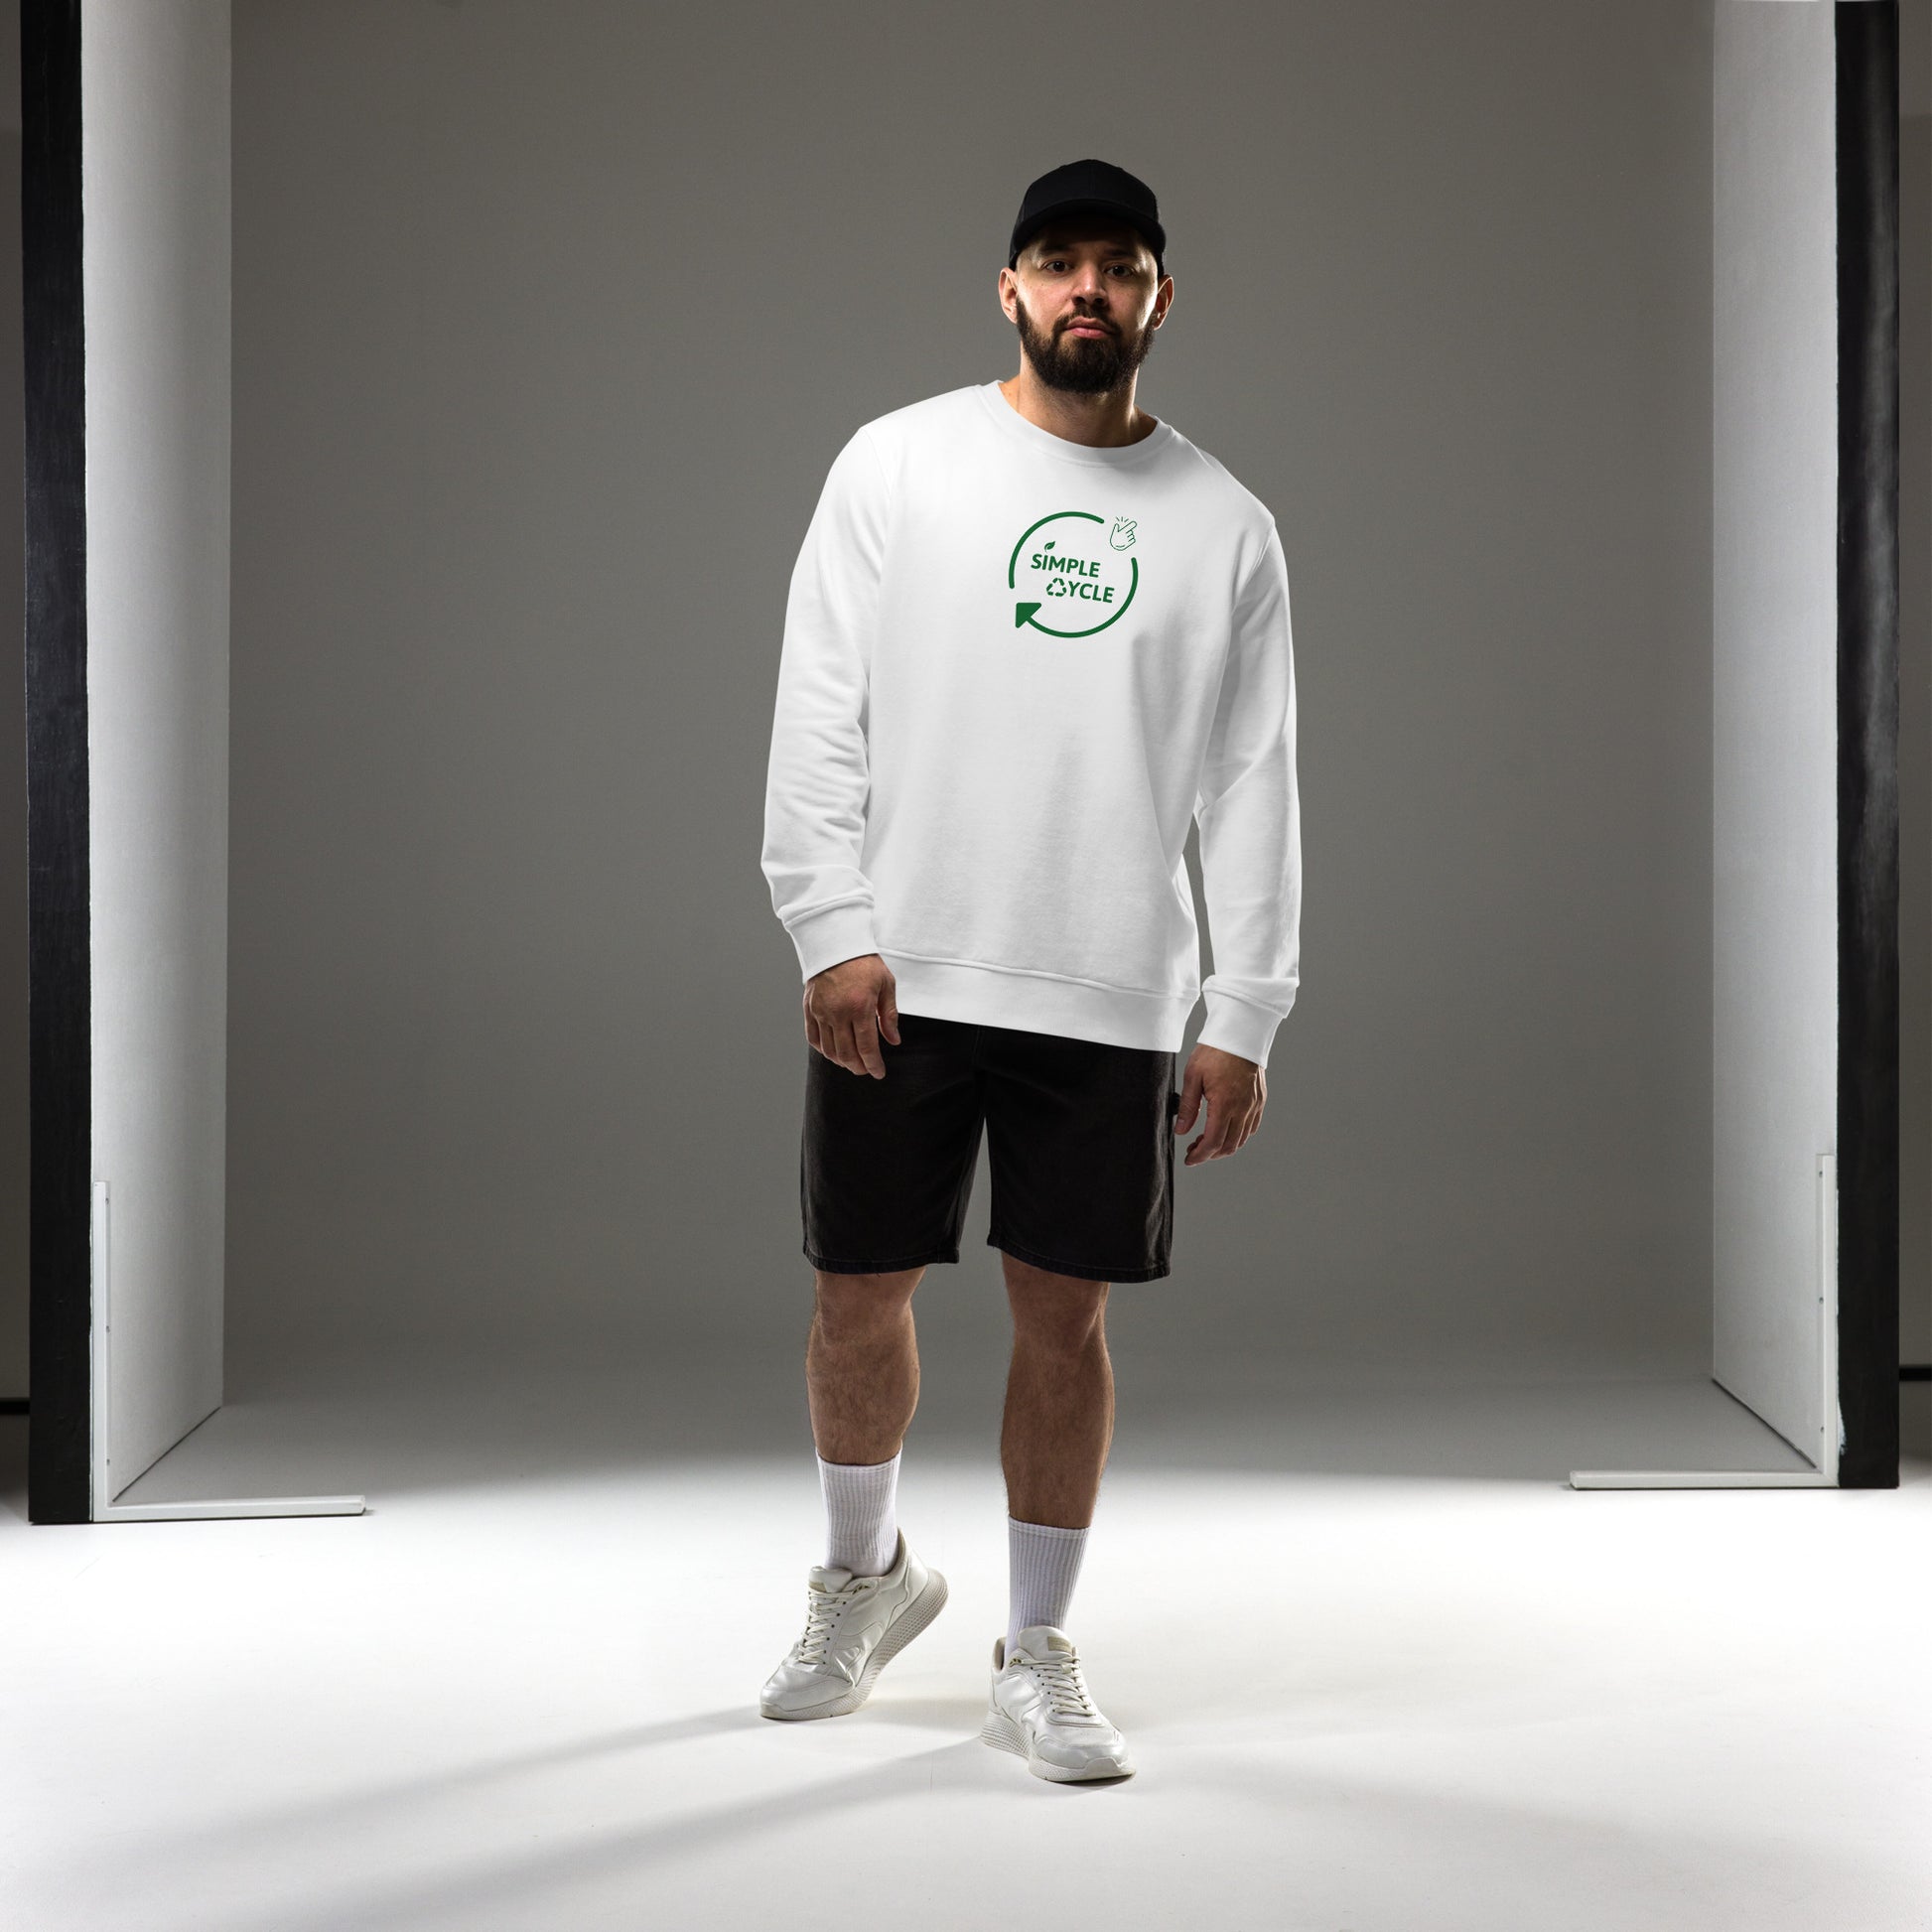 SimpleCycle Branded Unisex Organic Sweatshirt White front